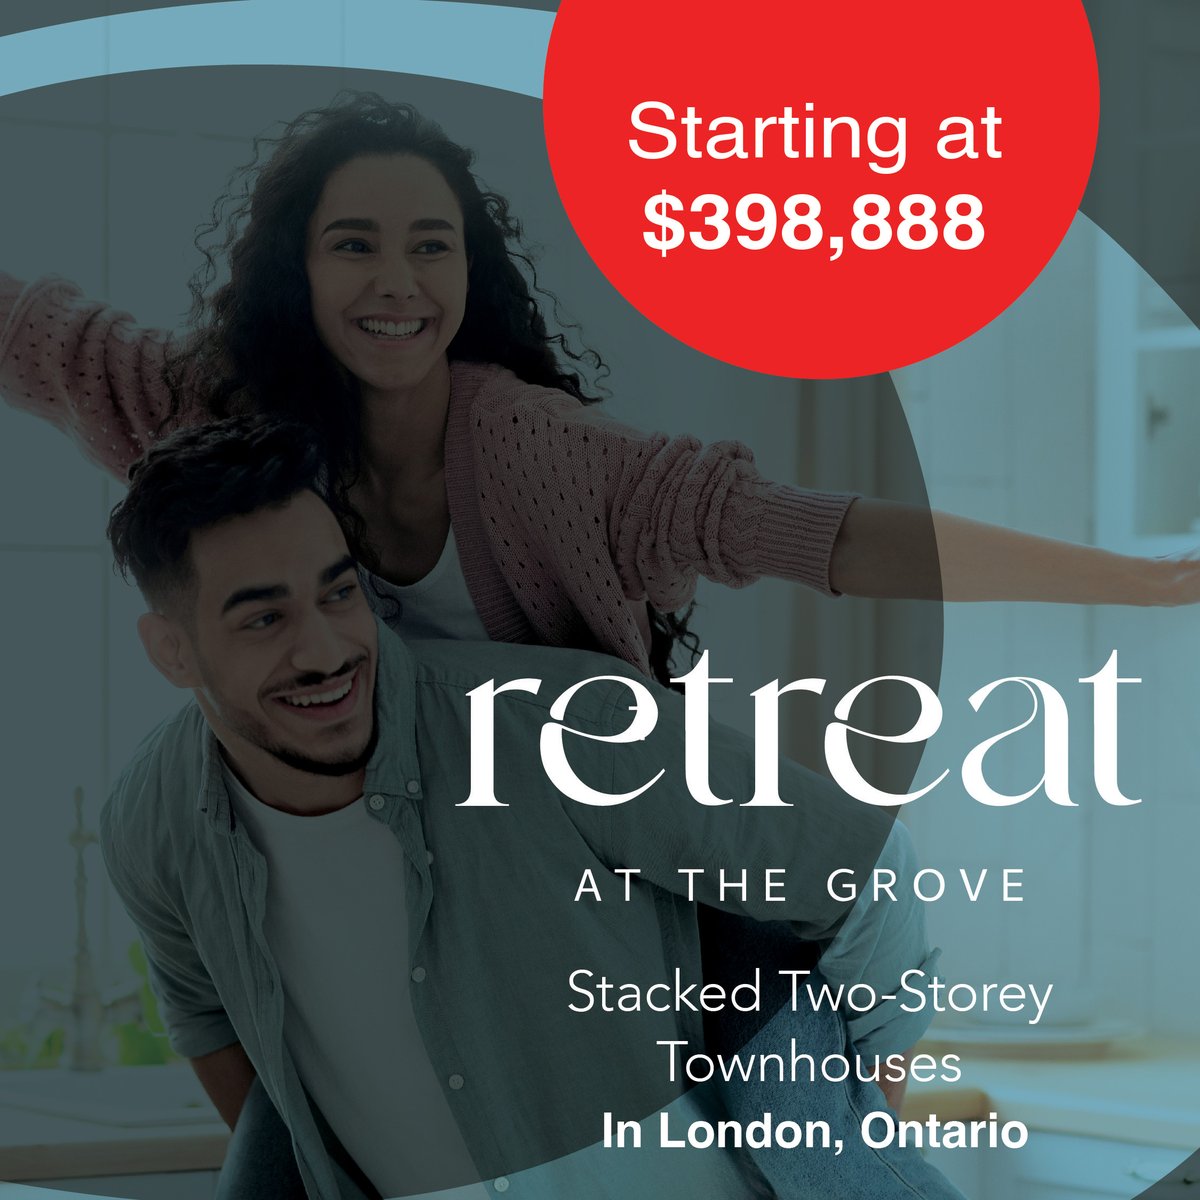 LAUNCH ALERT! Stacked townhomes starting from $398,888 More information will be released NEXT WEEK, so stay tuned! For more information, please visit: bit.ly/RetreatStacks #NewHome #RetreatCommunity #LdnOnt #IronstoneBuilt #LondonOntarioRealEstate #Townhomes #LondonOntario